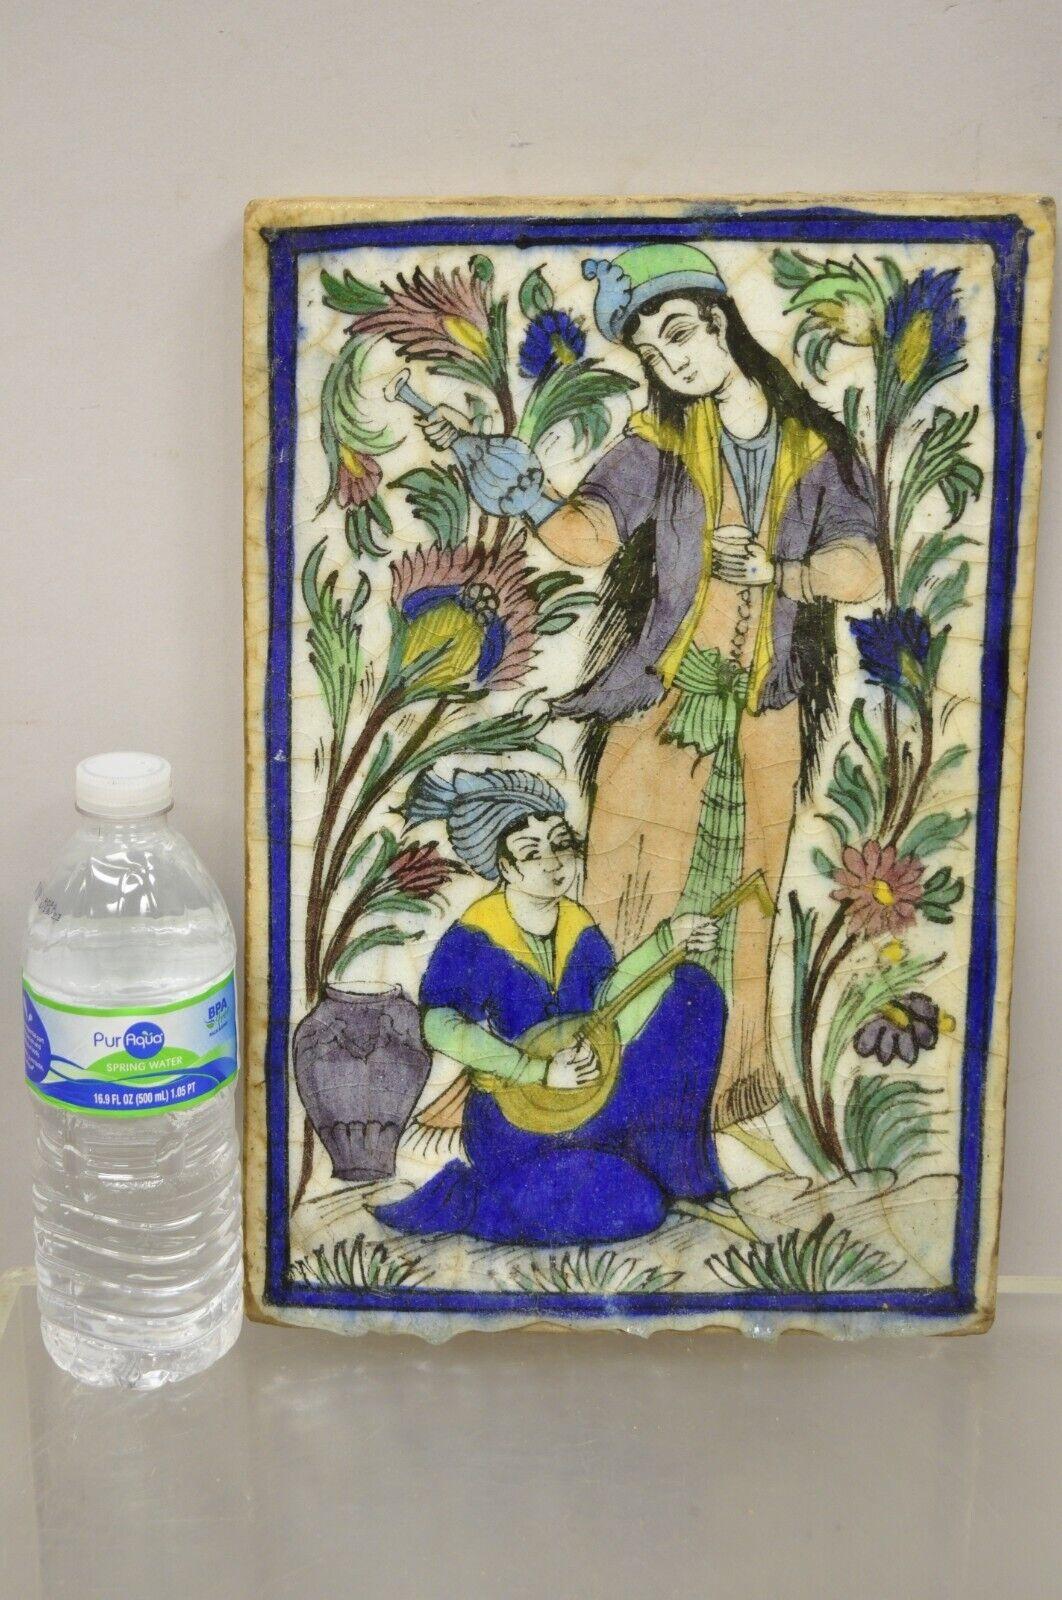 Antique Persian Iznik Qajar Style Ceramic Pottery Tile 2 Women, 1 Playing Guitar C1. Original crackle glazed finish, heavy ceramic pottery construction, very impressive detail, wonderful style and form. Great to mount as wall art or accent tiles for